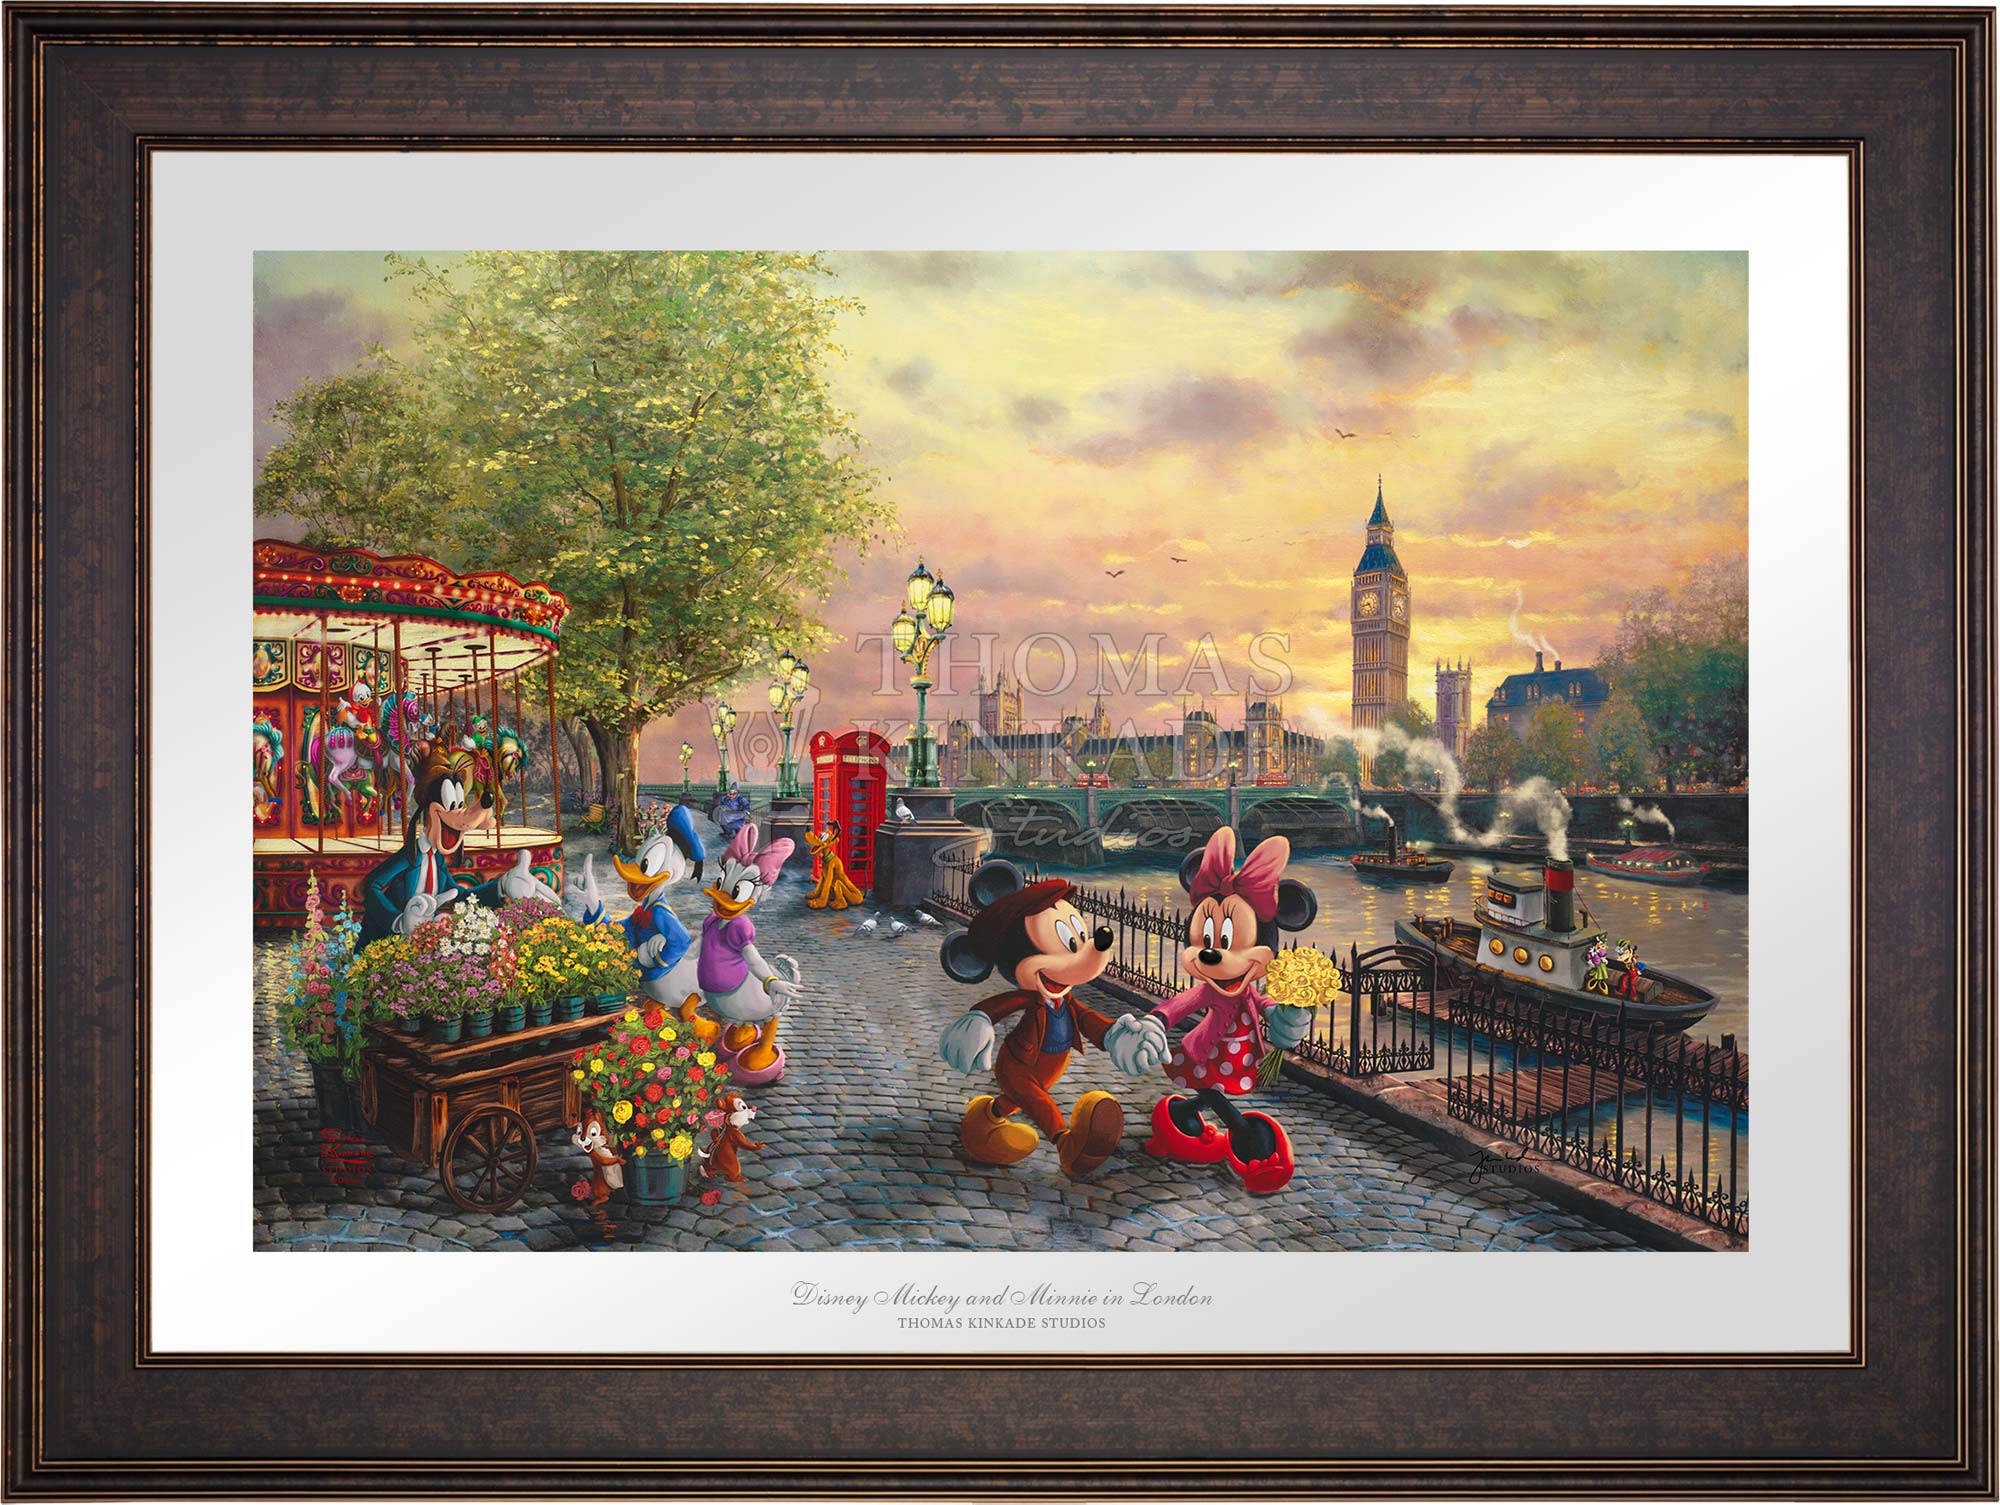 Disney Mickey and Minnie in London - Limited Edition Paper - Thomas Kinkade Studios